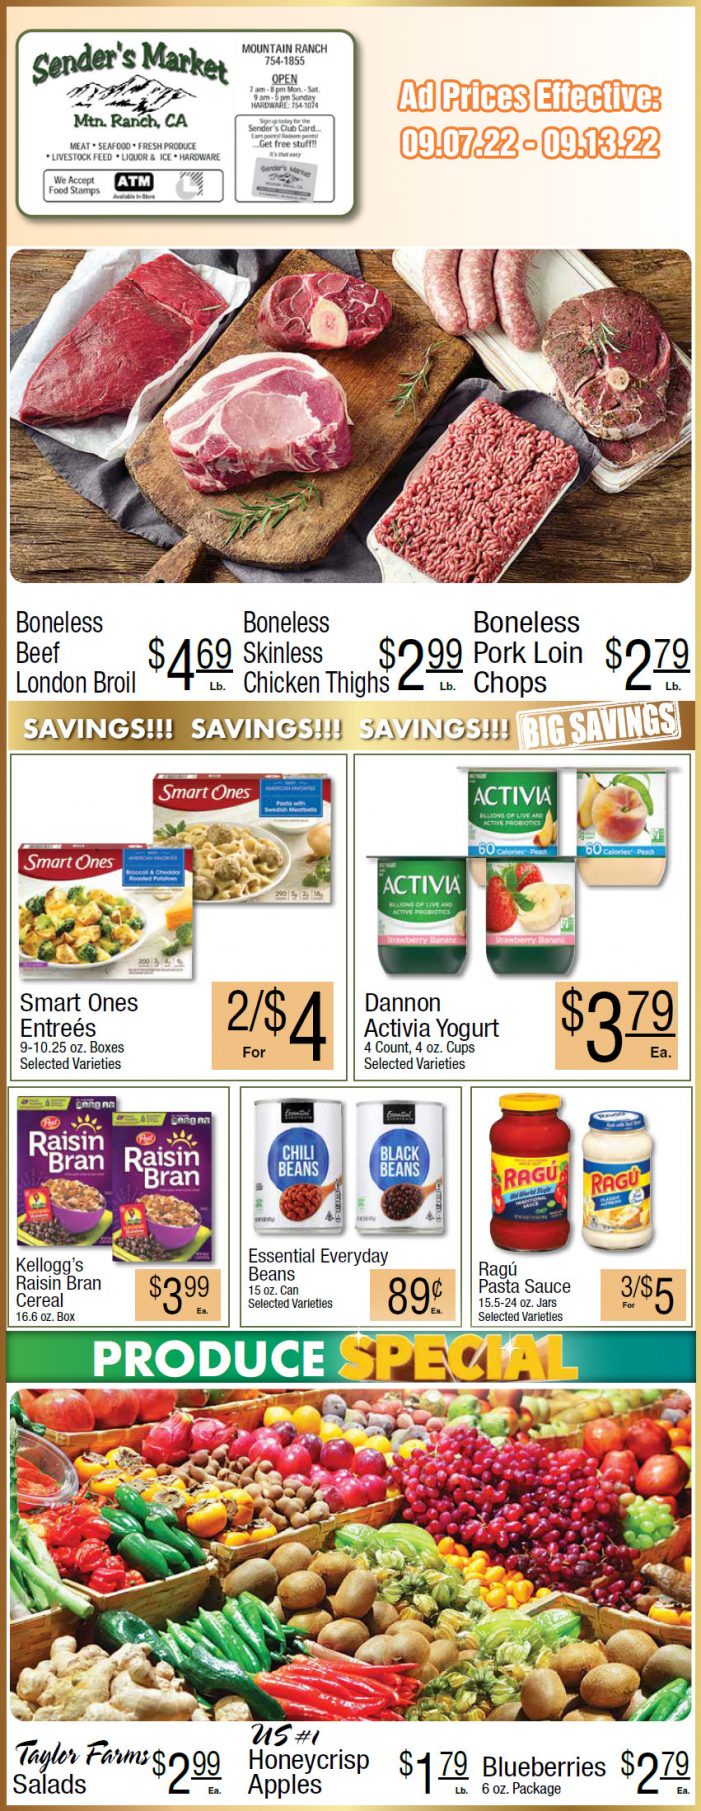 Sender’s Market Weekly Ad & Grocery Specials Through September 13th! Shop Local & Save!